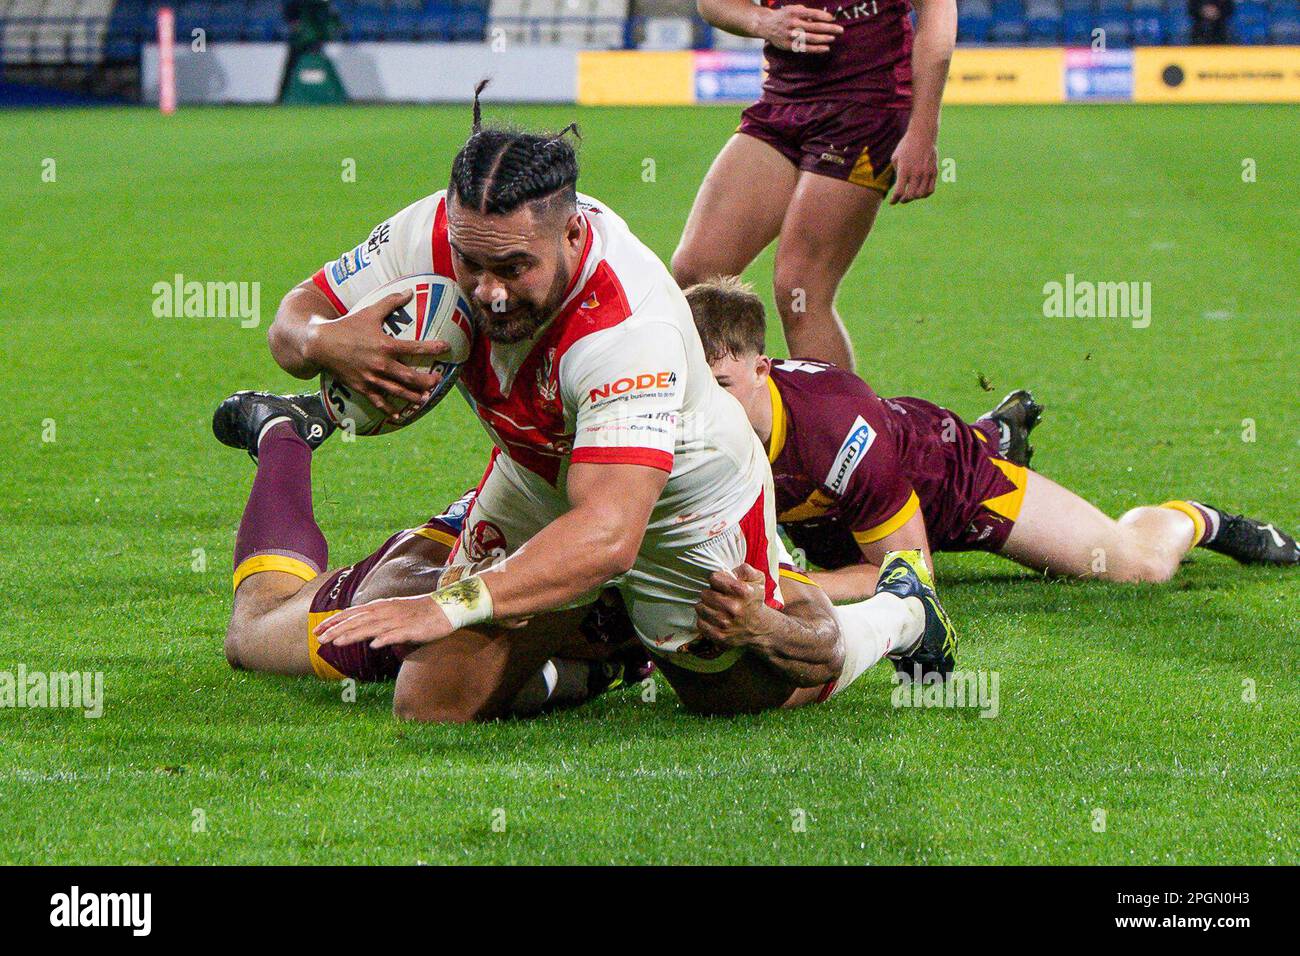 Konrad Hurrell #23 of St Helens goes over for a try during the Betfred Super League Round 6 match Huddersfield Giants vs St Helens at John Smith's Stadium, Huddersfield, United Kingdom, 23rd March 2023  (Photo by Craig Thomas/News Images) Stock Photo